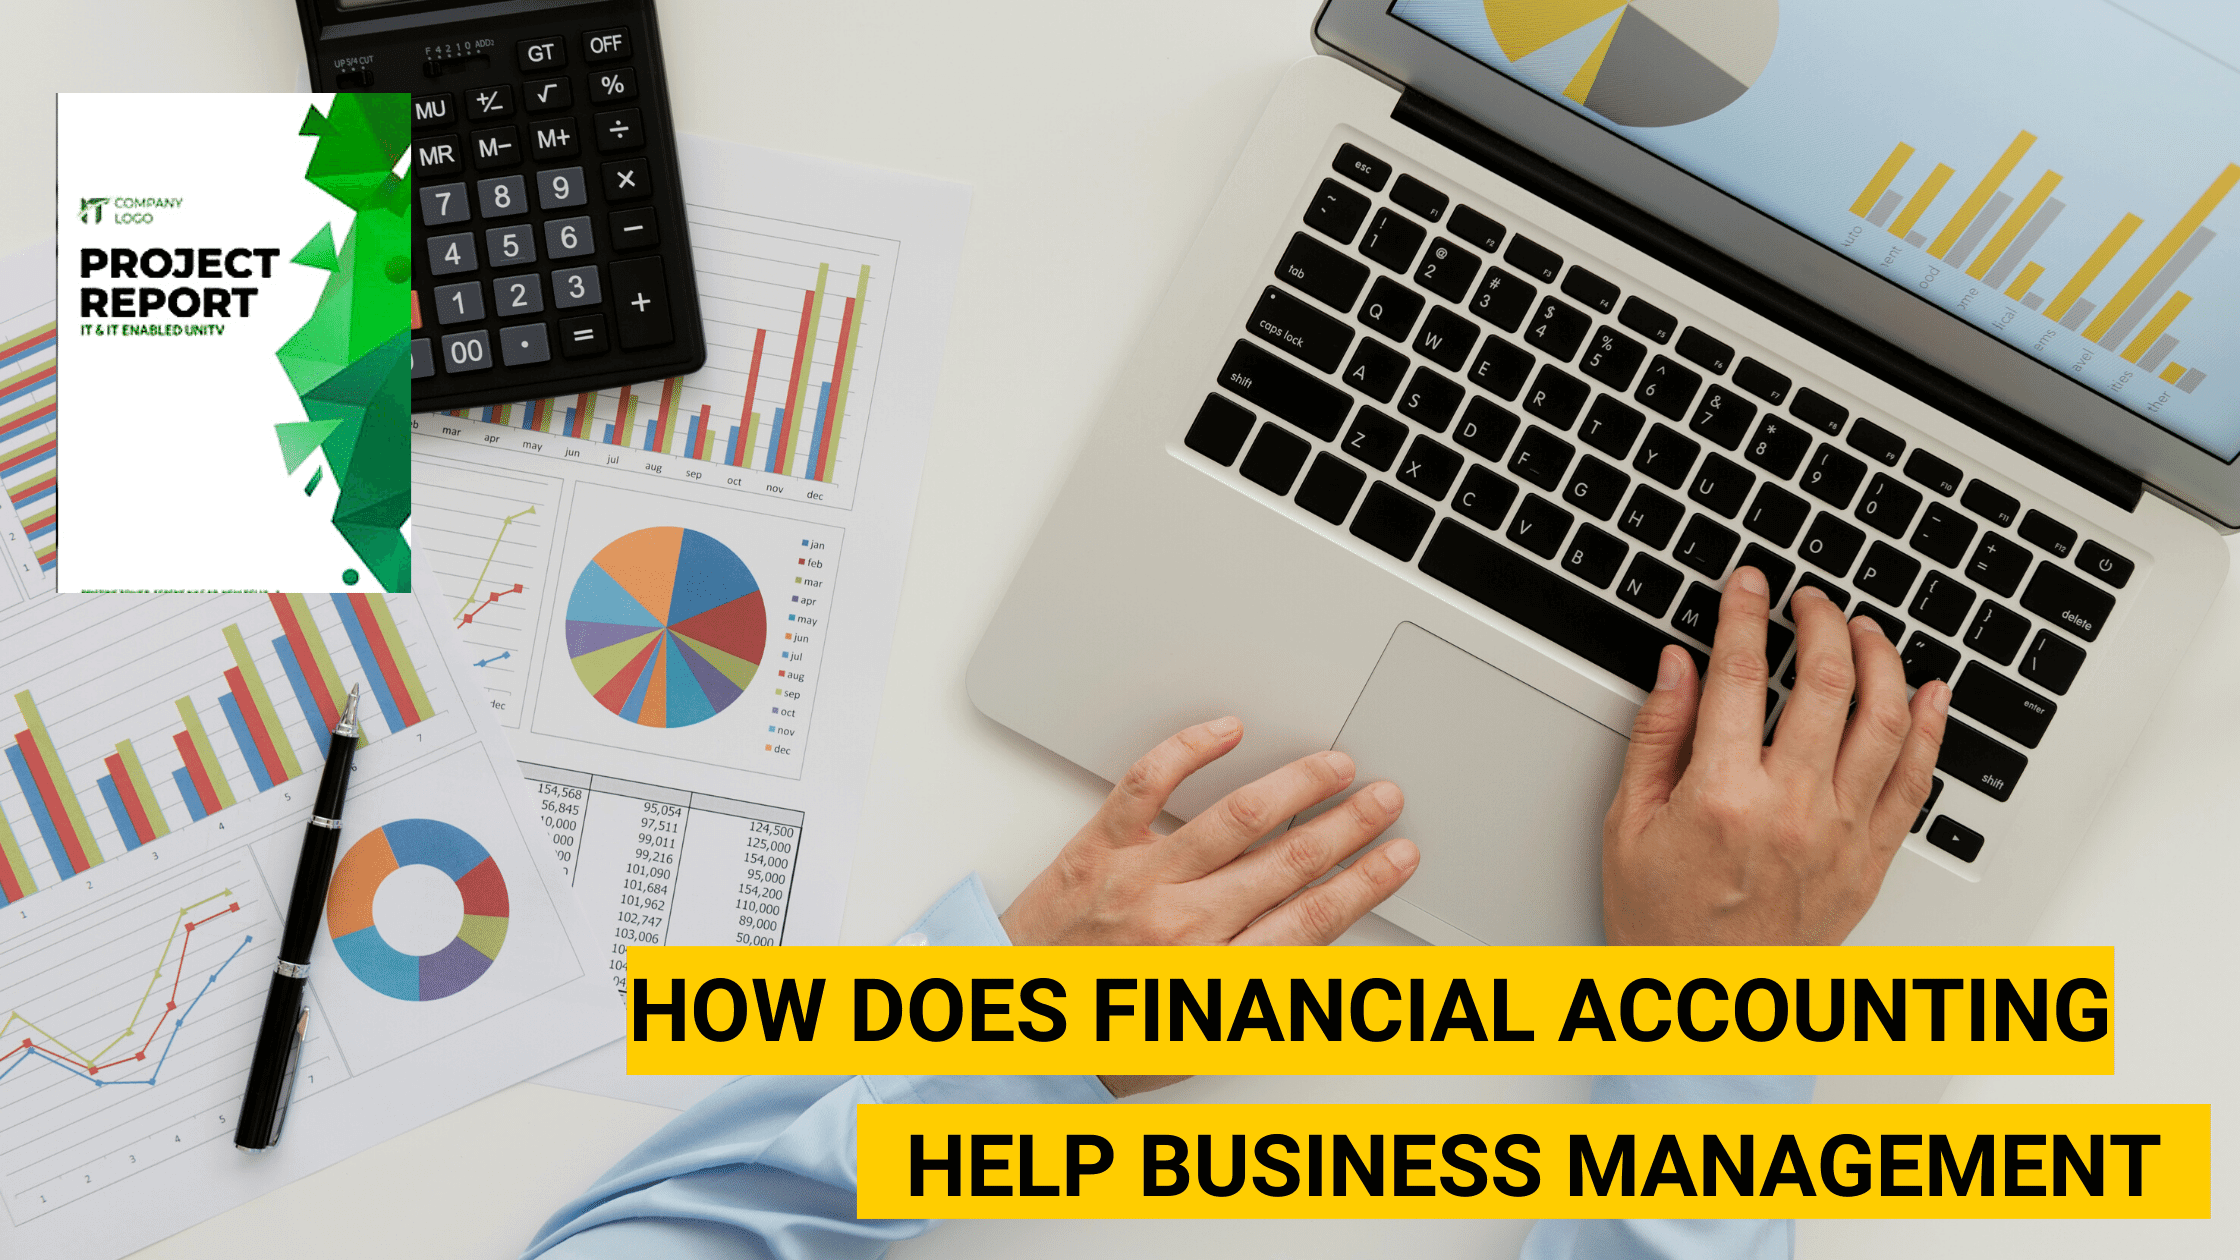 How does financial accounting help business management